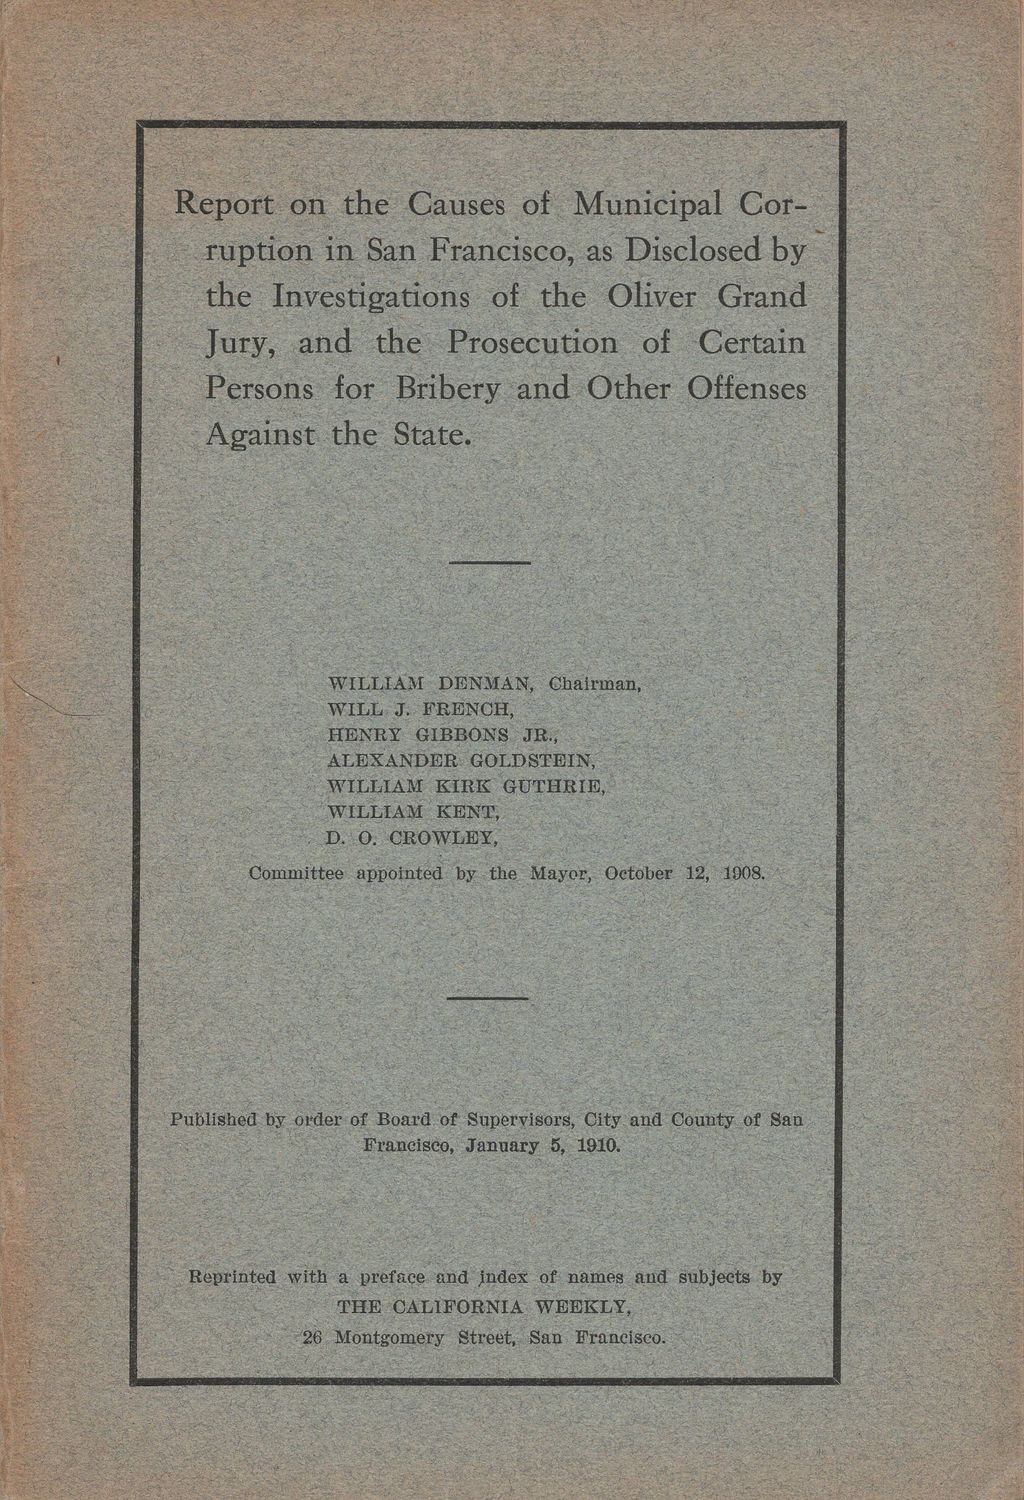 1910 Report on the Causes of Corruption